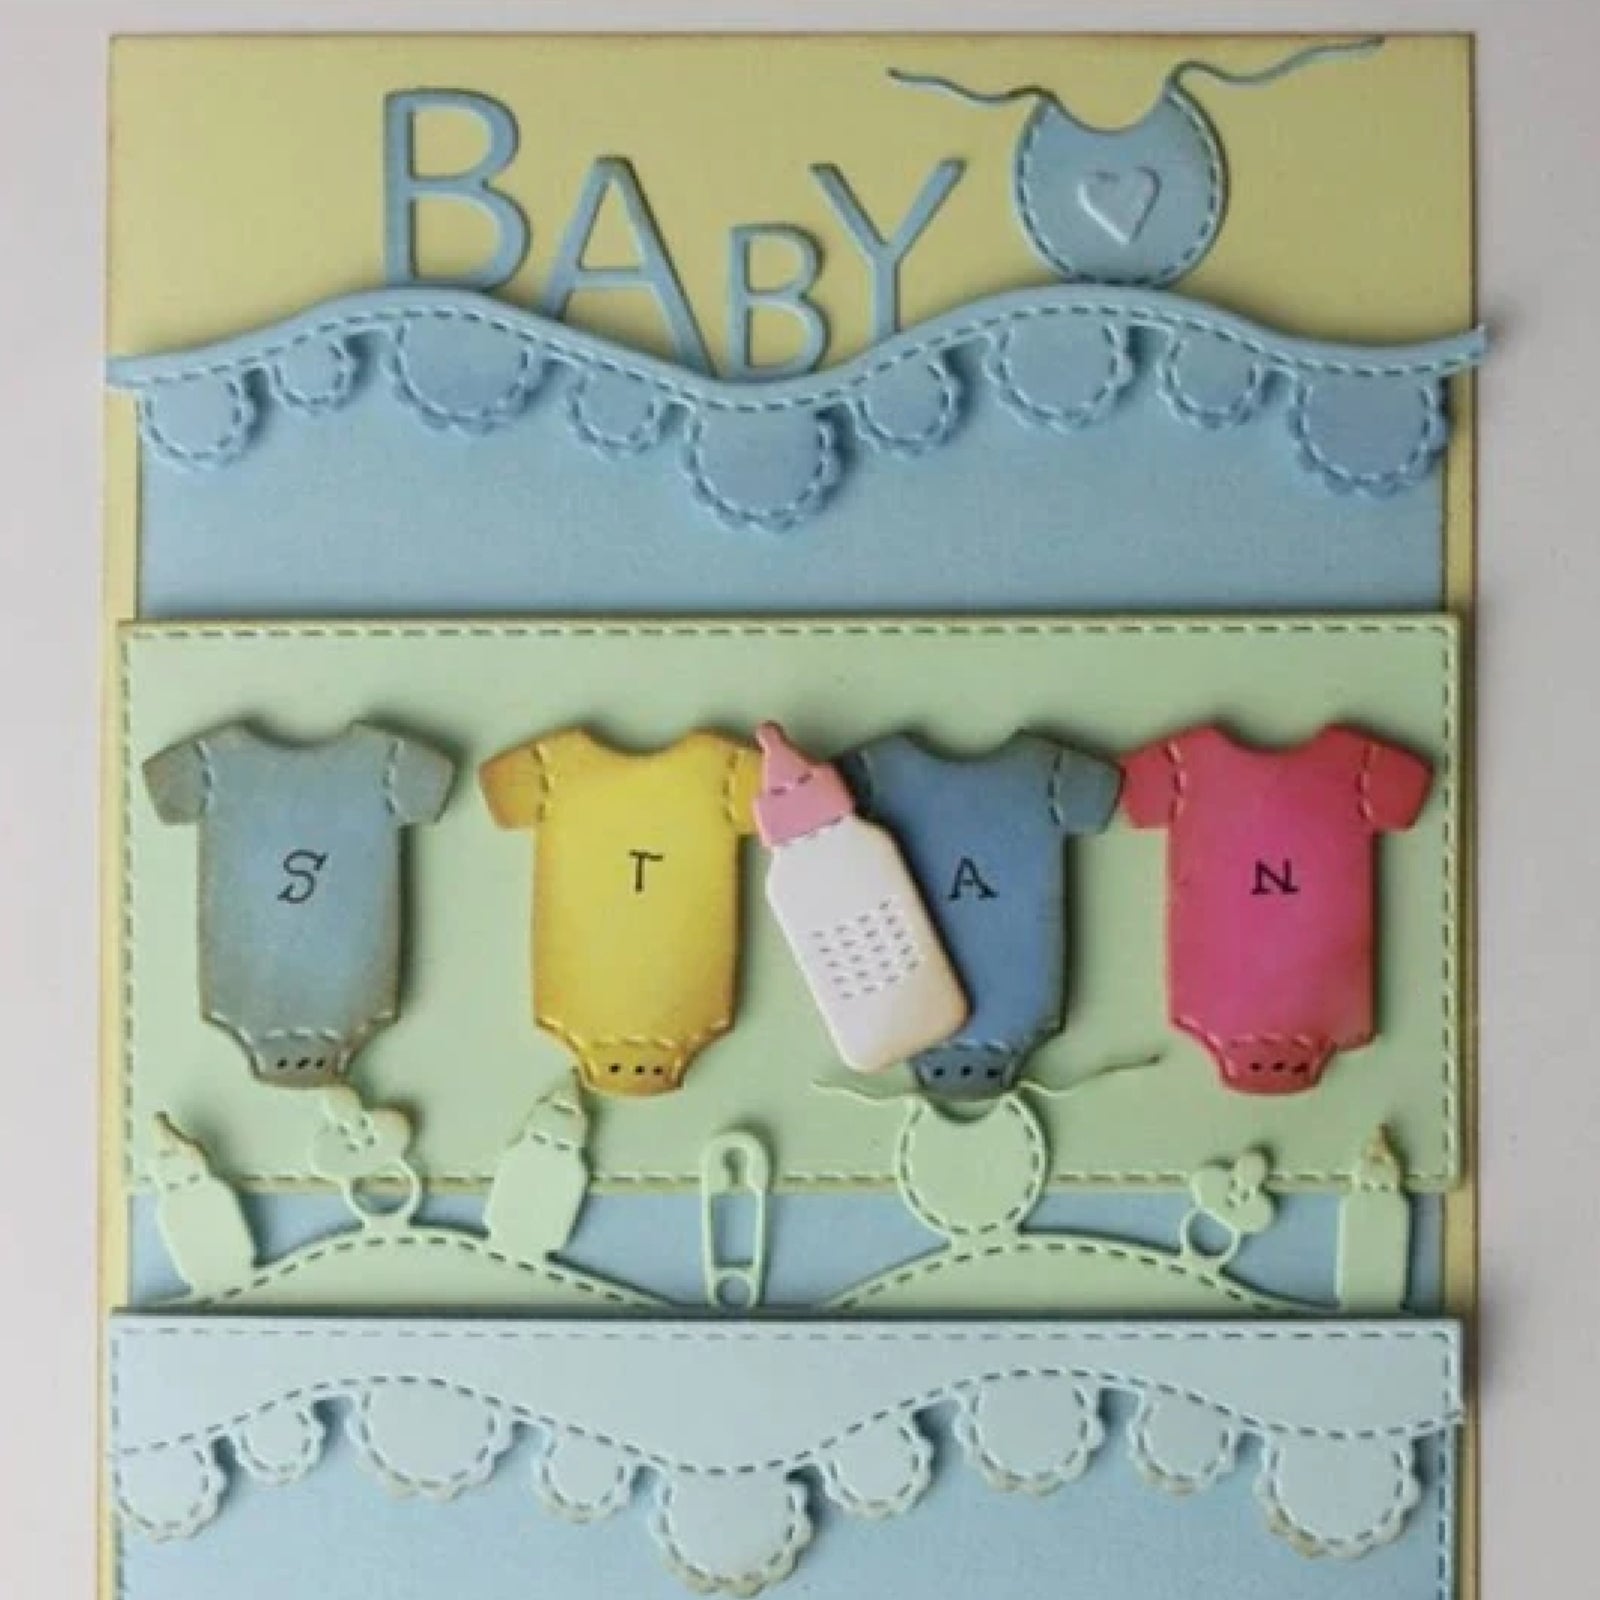 Baby Accessories Stitched Border Edge w Clothes, Pacifier, Bottle Cutting Dies